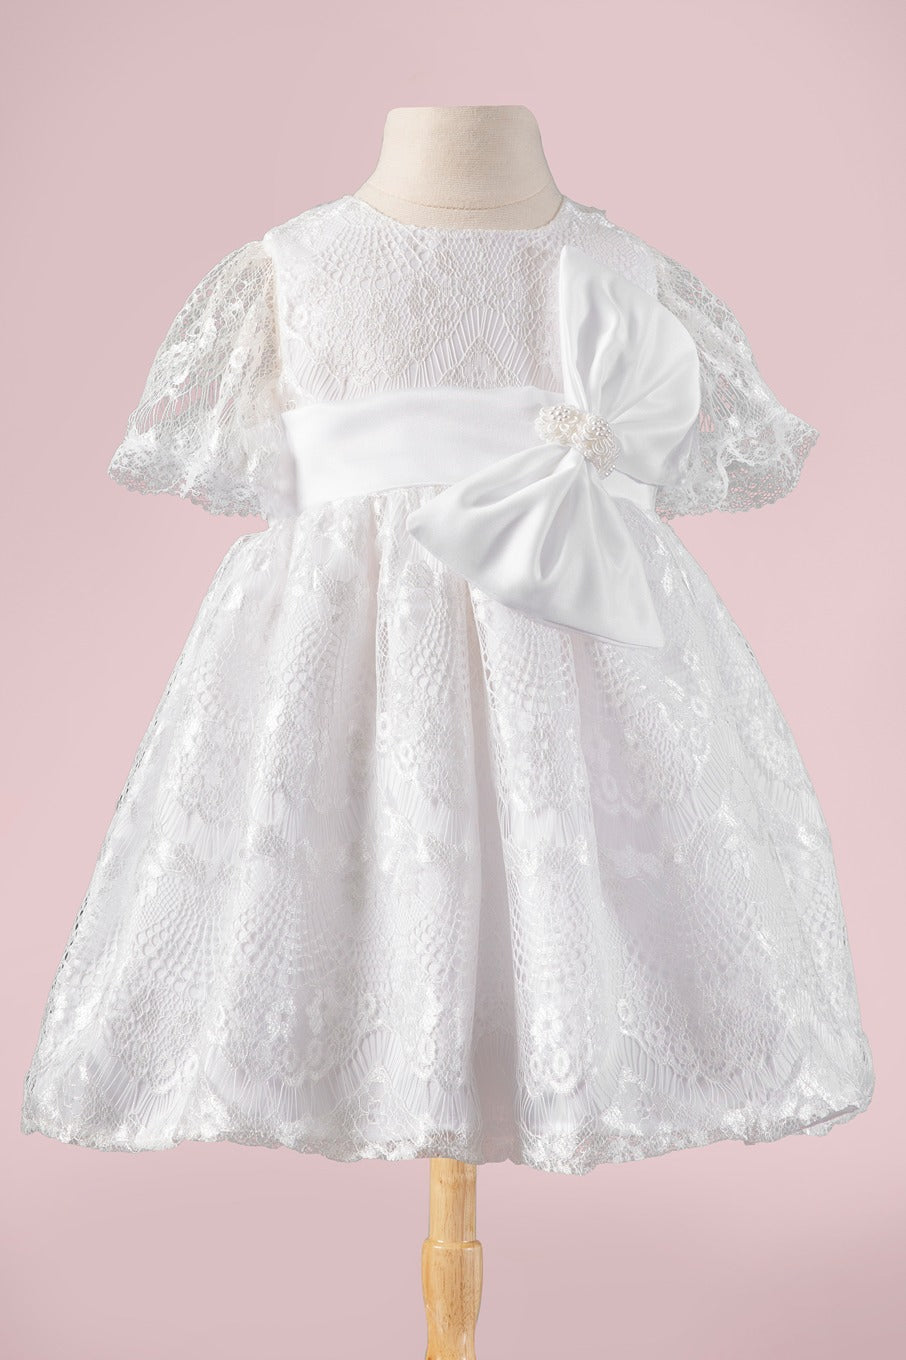 white lace dresses for girls